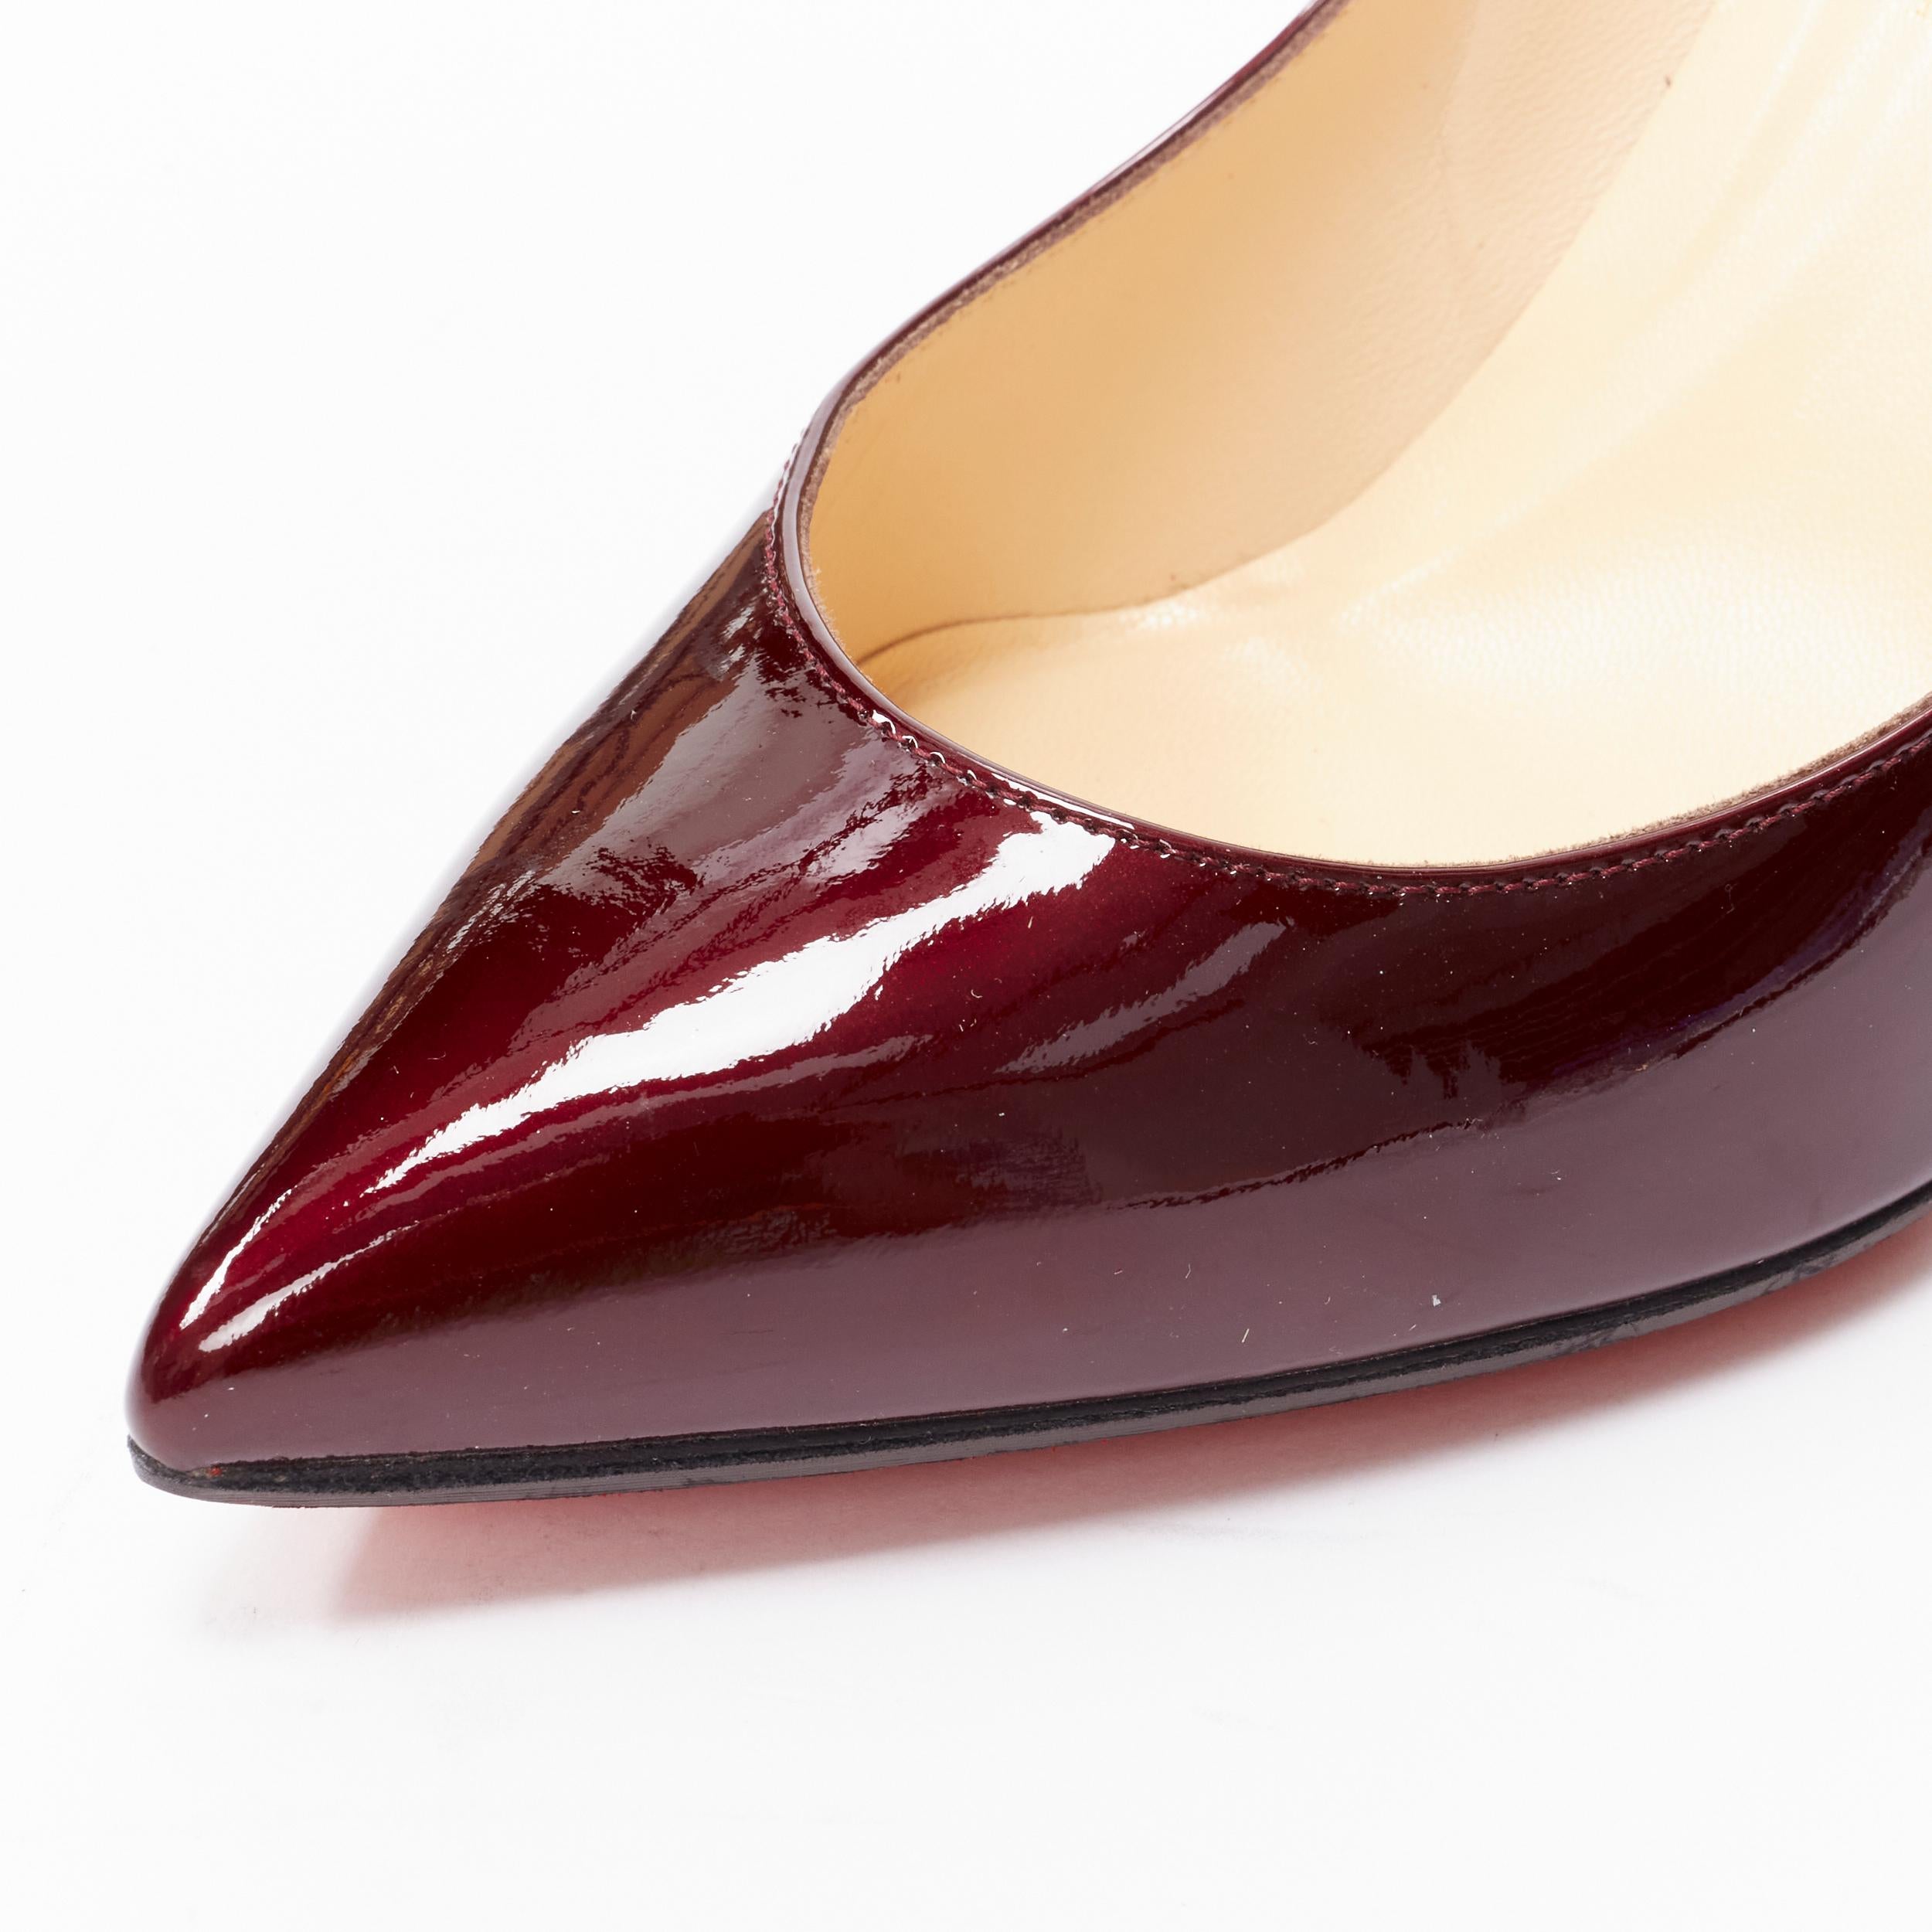 Women's CHRISTIAN LOUBOUTIN burgundy red patent leather 85mm pigalle pumps EU37